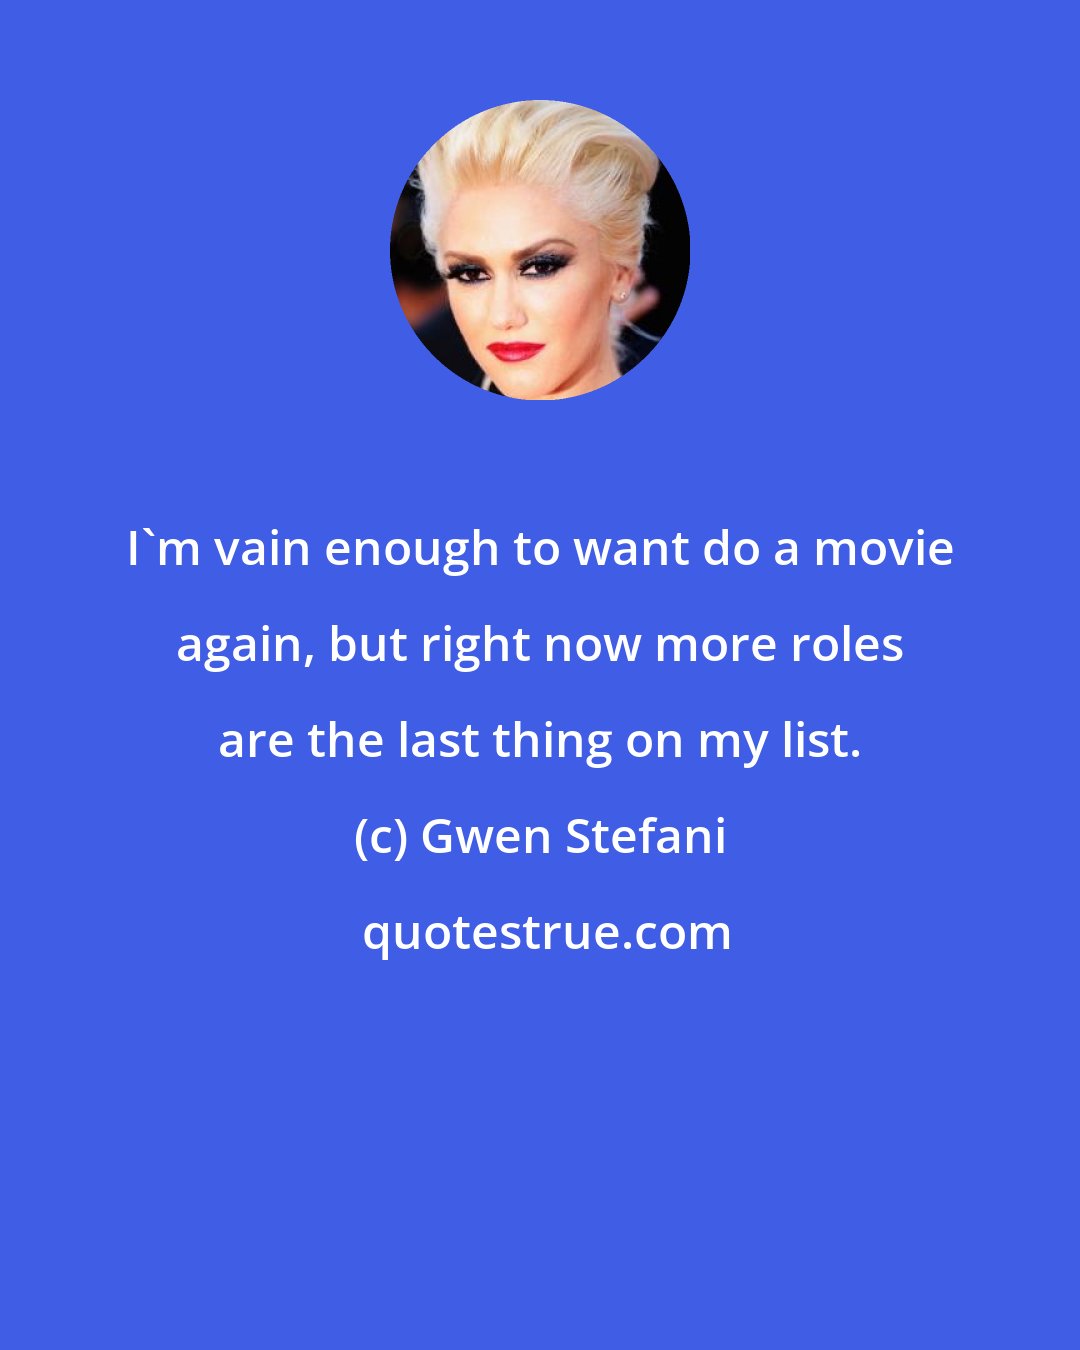 Gwen Stefani: I'm vain enough to want do a movie again, but right now more roles are the last thing on my list.